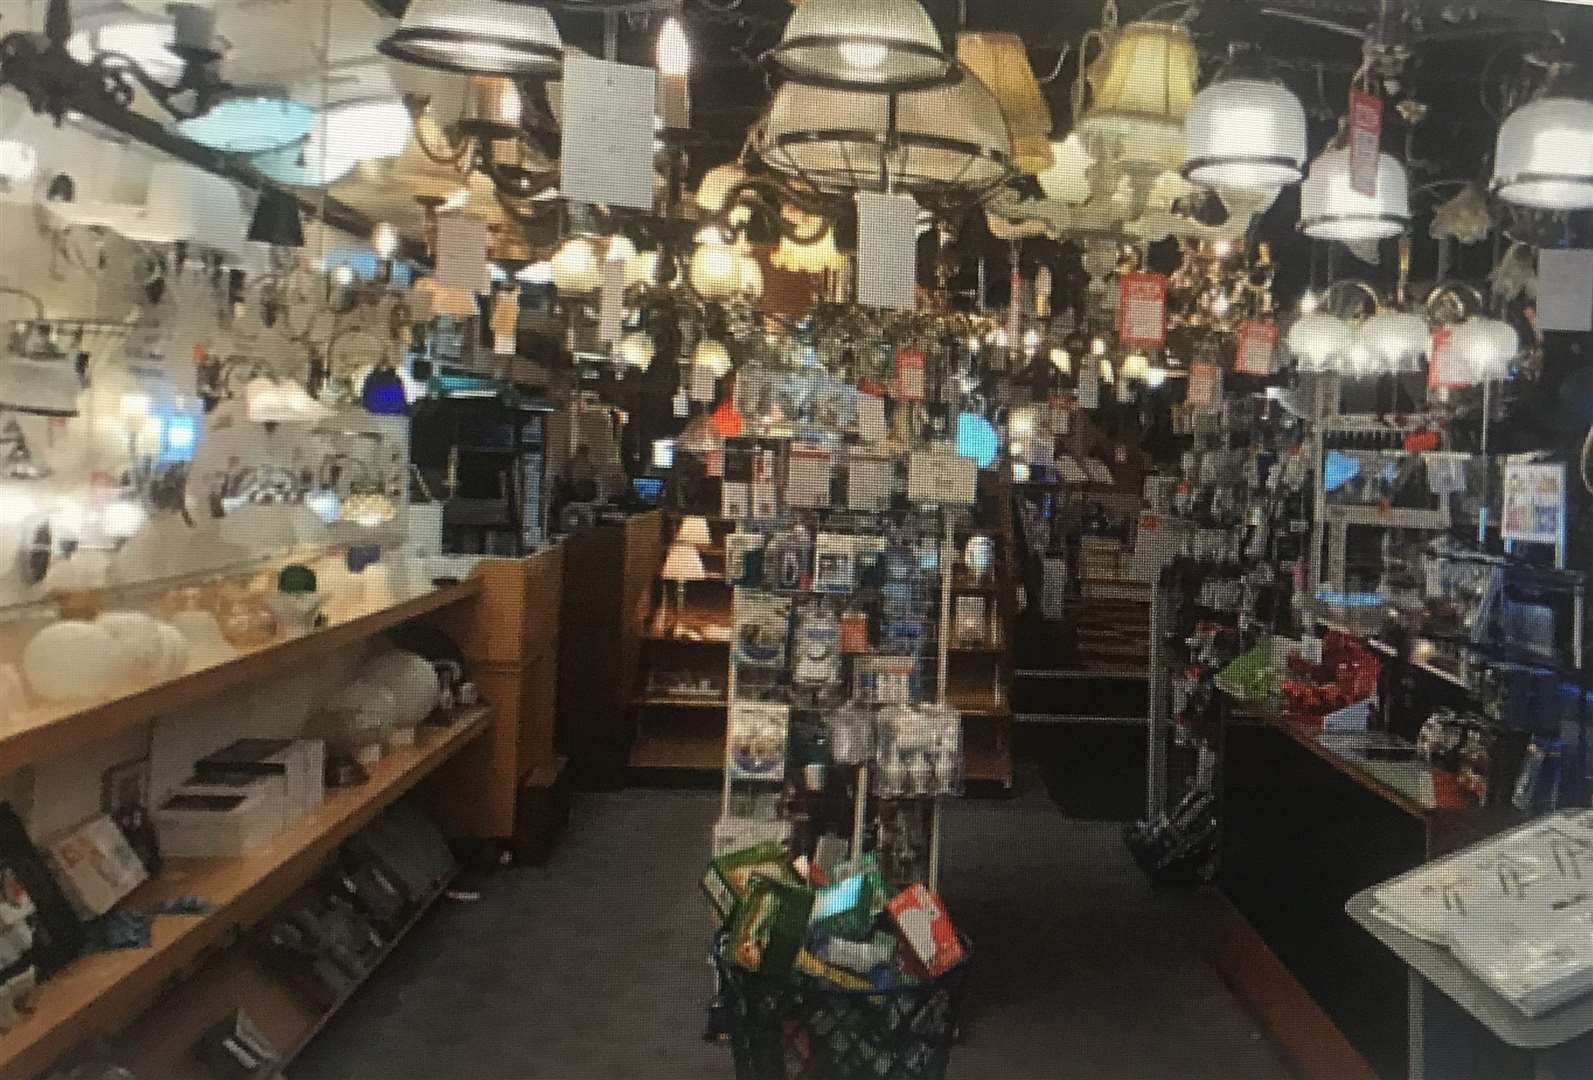 The shop is an "Aladdin's Cave" of lights, according to the owner